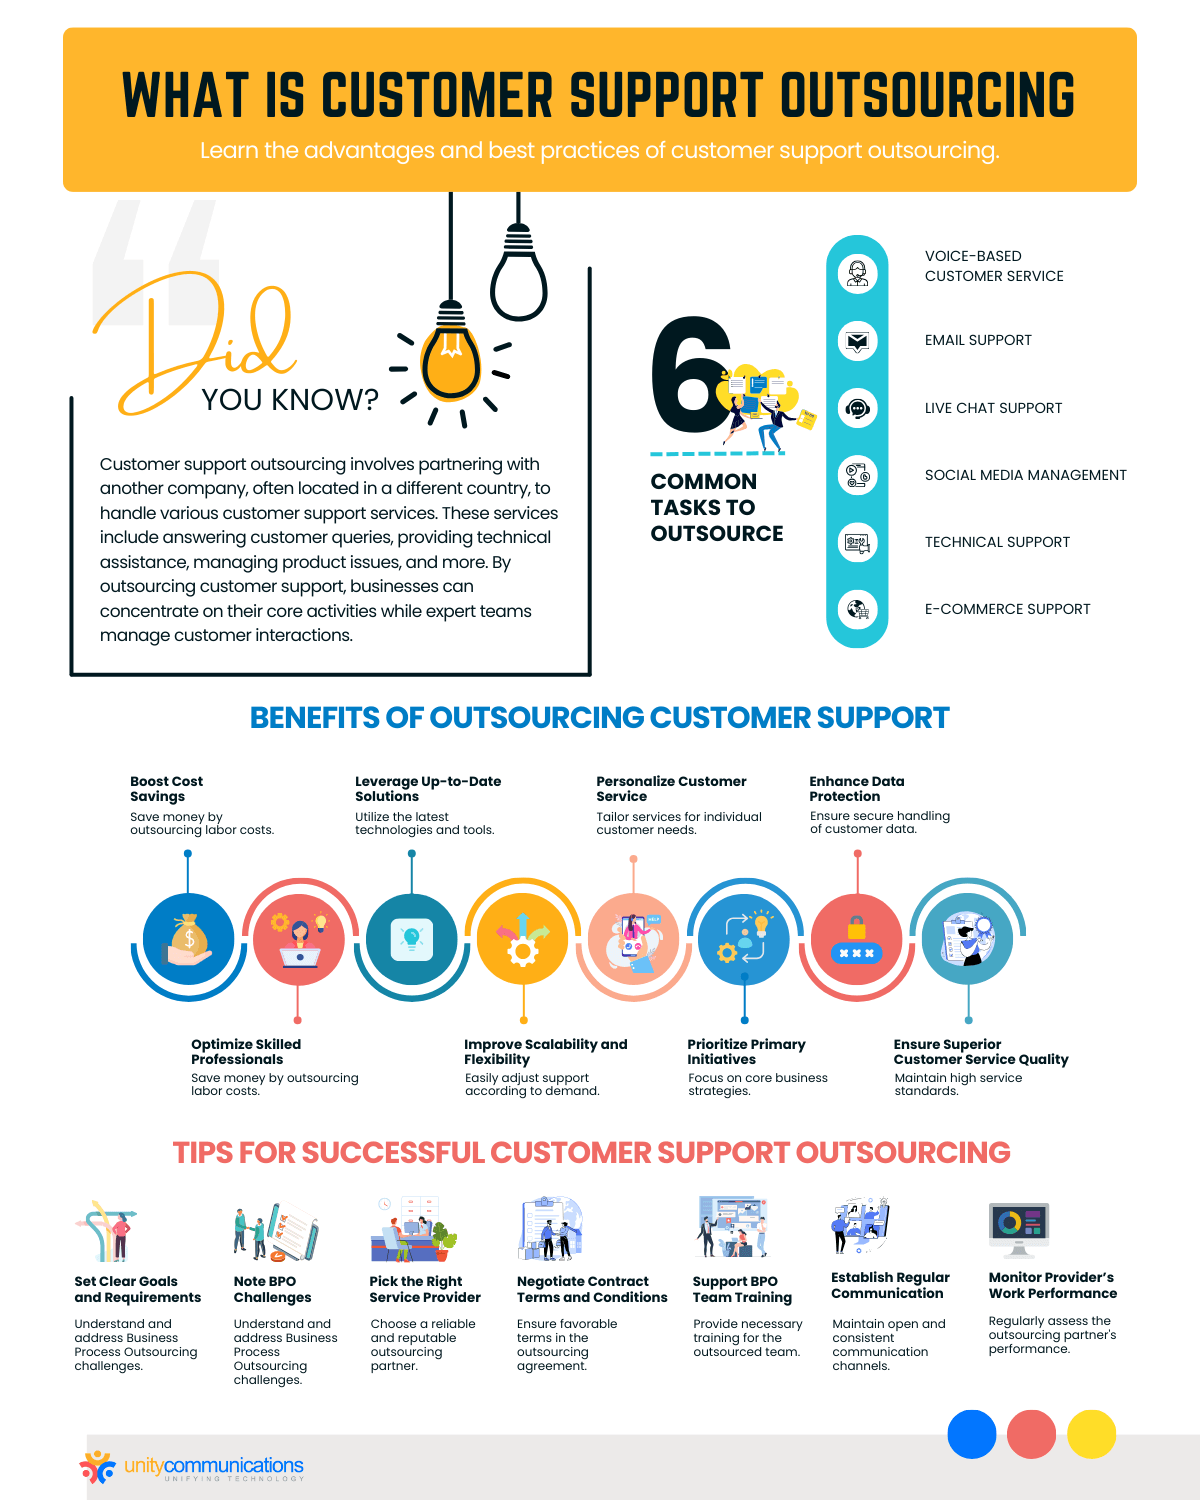 What Is Customer Support Outsourcing?